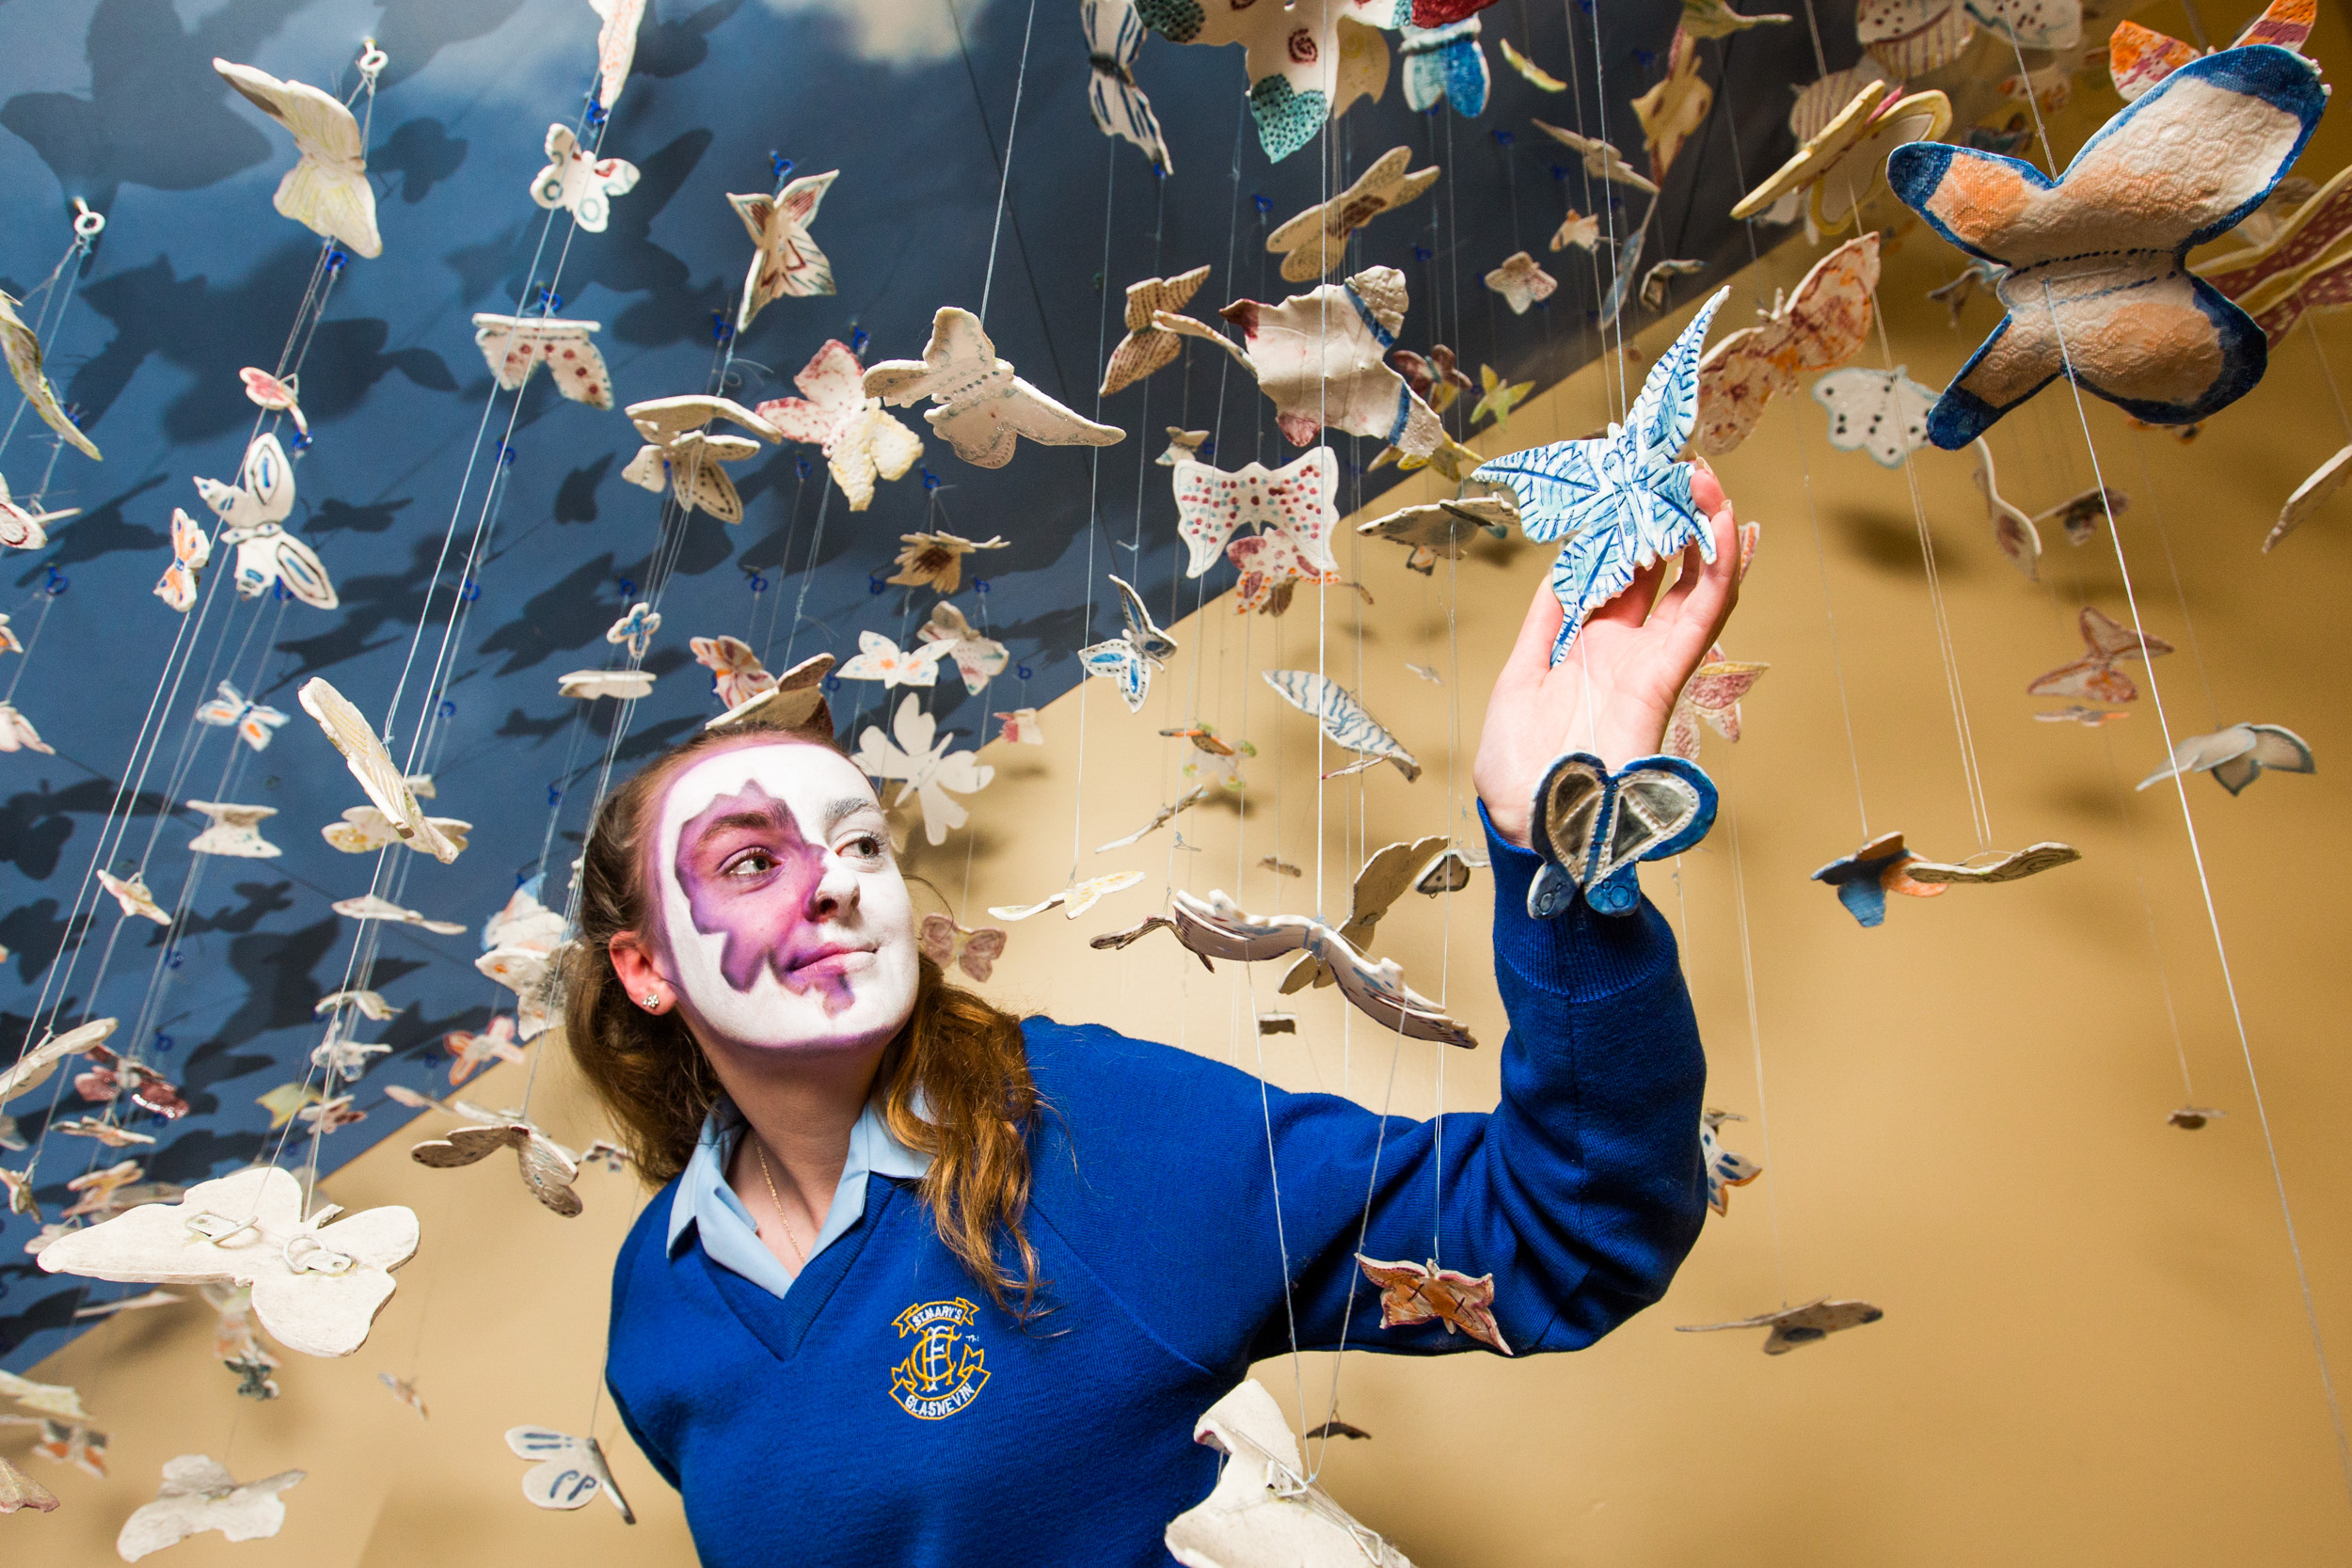 No repro fee 25-10-2016 Picture shows Aoife Rigey,fifth year art student from St Mary’s Secondary School, H F, Glasnevin, Dublin in one of the school’s two permanent NAPD Creative Engagement Project installations   marking the the Art Teachers’ Association of Ireland launch of the #stateoftheart campaign to raise awareness of the urgent need for change in Leaving Certificate Art highlighted by a day of action on Oct 26th.Pic:Naoise Culhane-no fee The campaign is designed to raise awareness of the urgent need for reform in the Leaving Cert Art curriculum.  Key points for change:  Marking scheme: the current system means A1s are proportionally less achievable than any other Leaving Cert subject.  Curriculum development & reform: despite requests, the Art Leaving Cert curriculum has not been revised since 1972.  Third level Art entry requirements: Leaving Cert Art itself is not required for entry to 3rd level (matriculation). However, portfolios are an essential component of entry, but aren’t covered within the curriculum. This puts extra financial and time pressure on students during the crucial Leaving Cert year.  It is essential that the Department of Education, National Council for Curriculum and Assessment (NCCA) and State Examination Commission (SEC) work together with art teachers, parent and student groups and relevant partners in culture and industry to design and implement a new Leaving Cert curriculum, not simply assessment reform.  Please support our day of action on 26th of October 2016; to raise awareness and promote change for students of today and to ensure the future creativity of our country.  Please visit our website www.artteachers.ie for further information. Your support in this campaign is important and greatly appreciated.  For Further info Please contact www.artteachers.ie or  Nadine McDonogh Cunningham – President   atai.president@gmail.com  Pic:Naoise Culhane-no fee